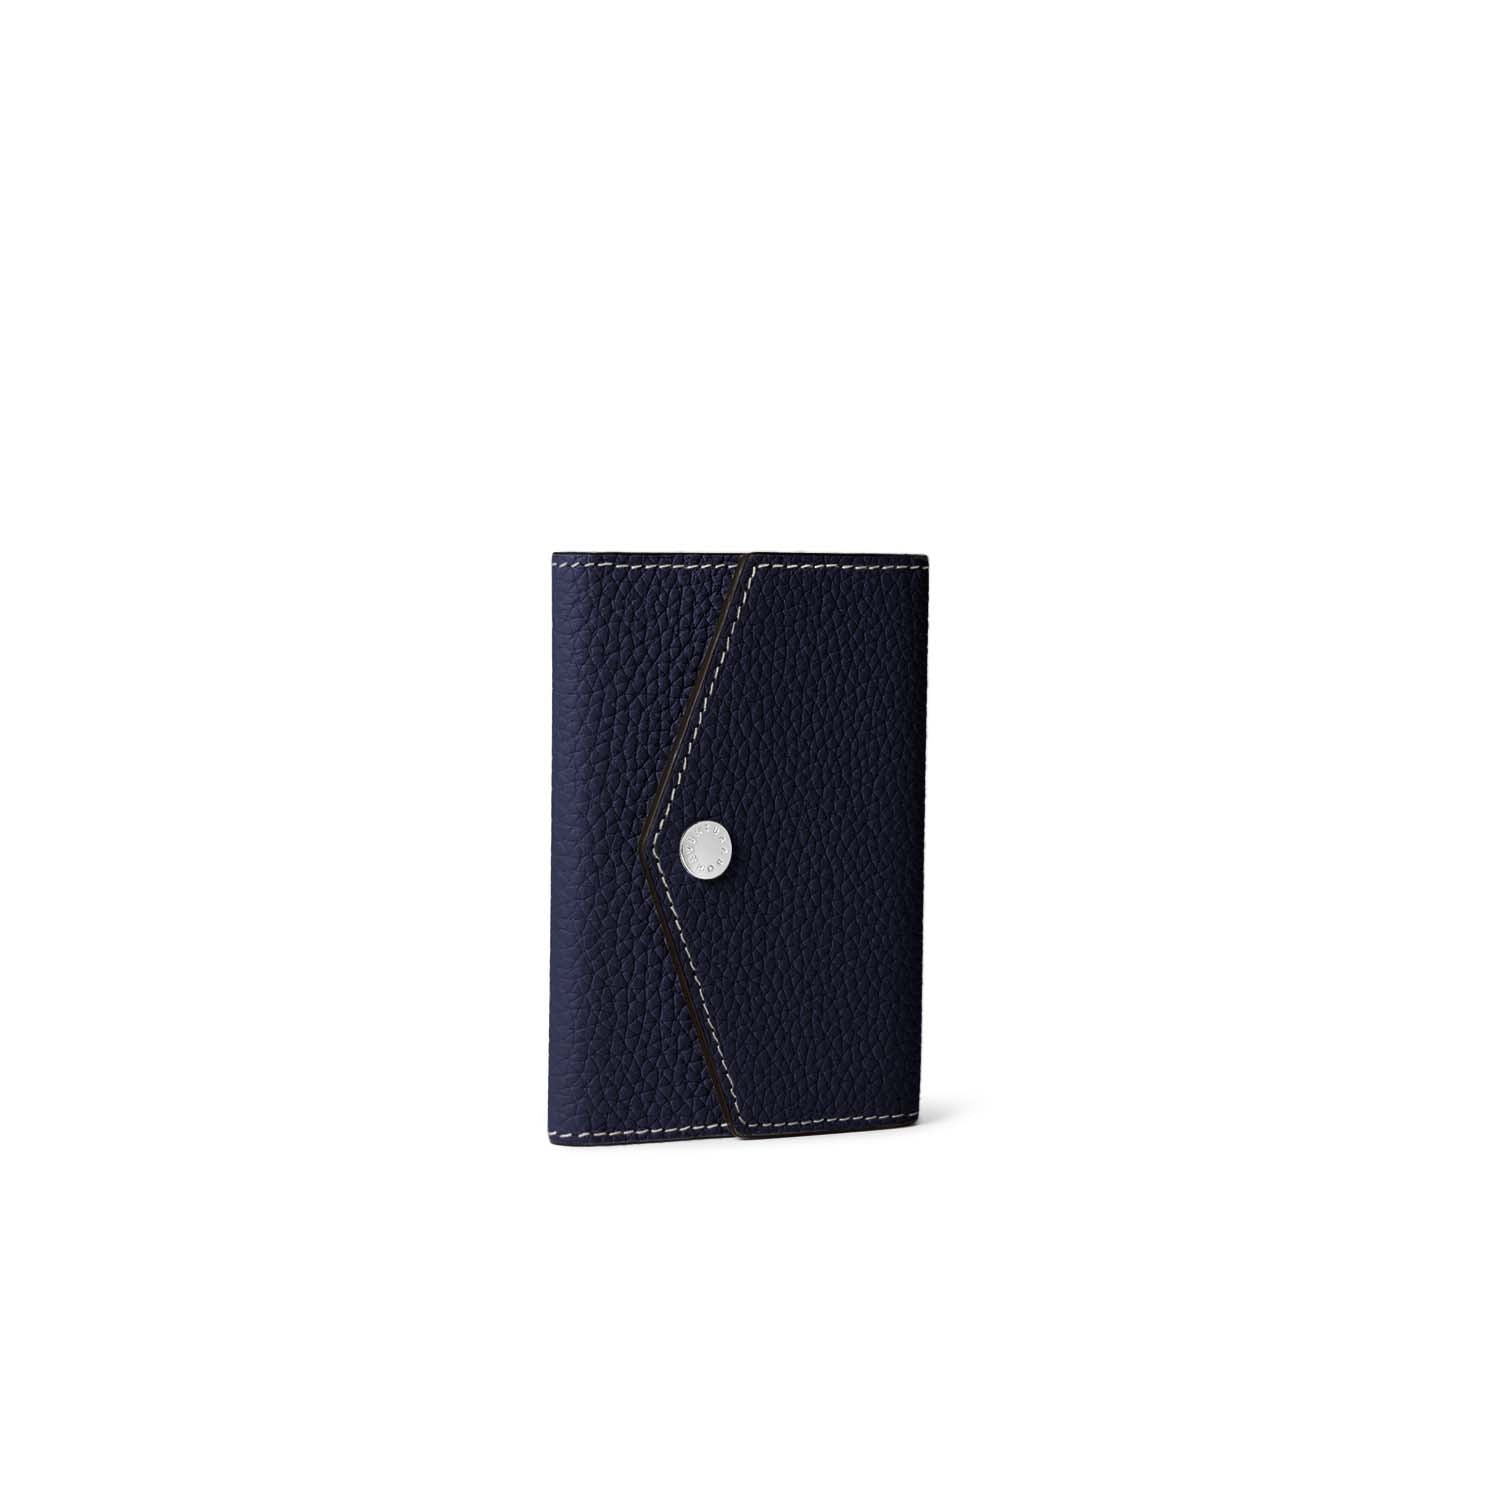 (Snap button back cover case) Mirror pouch in shrink leather